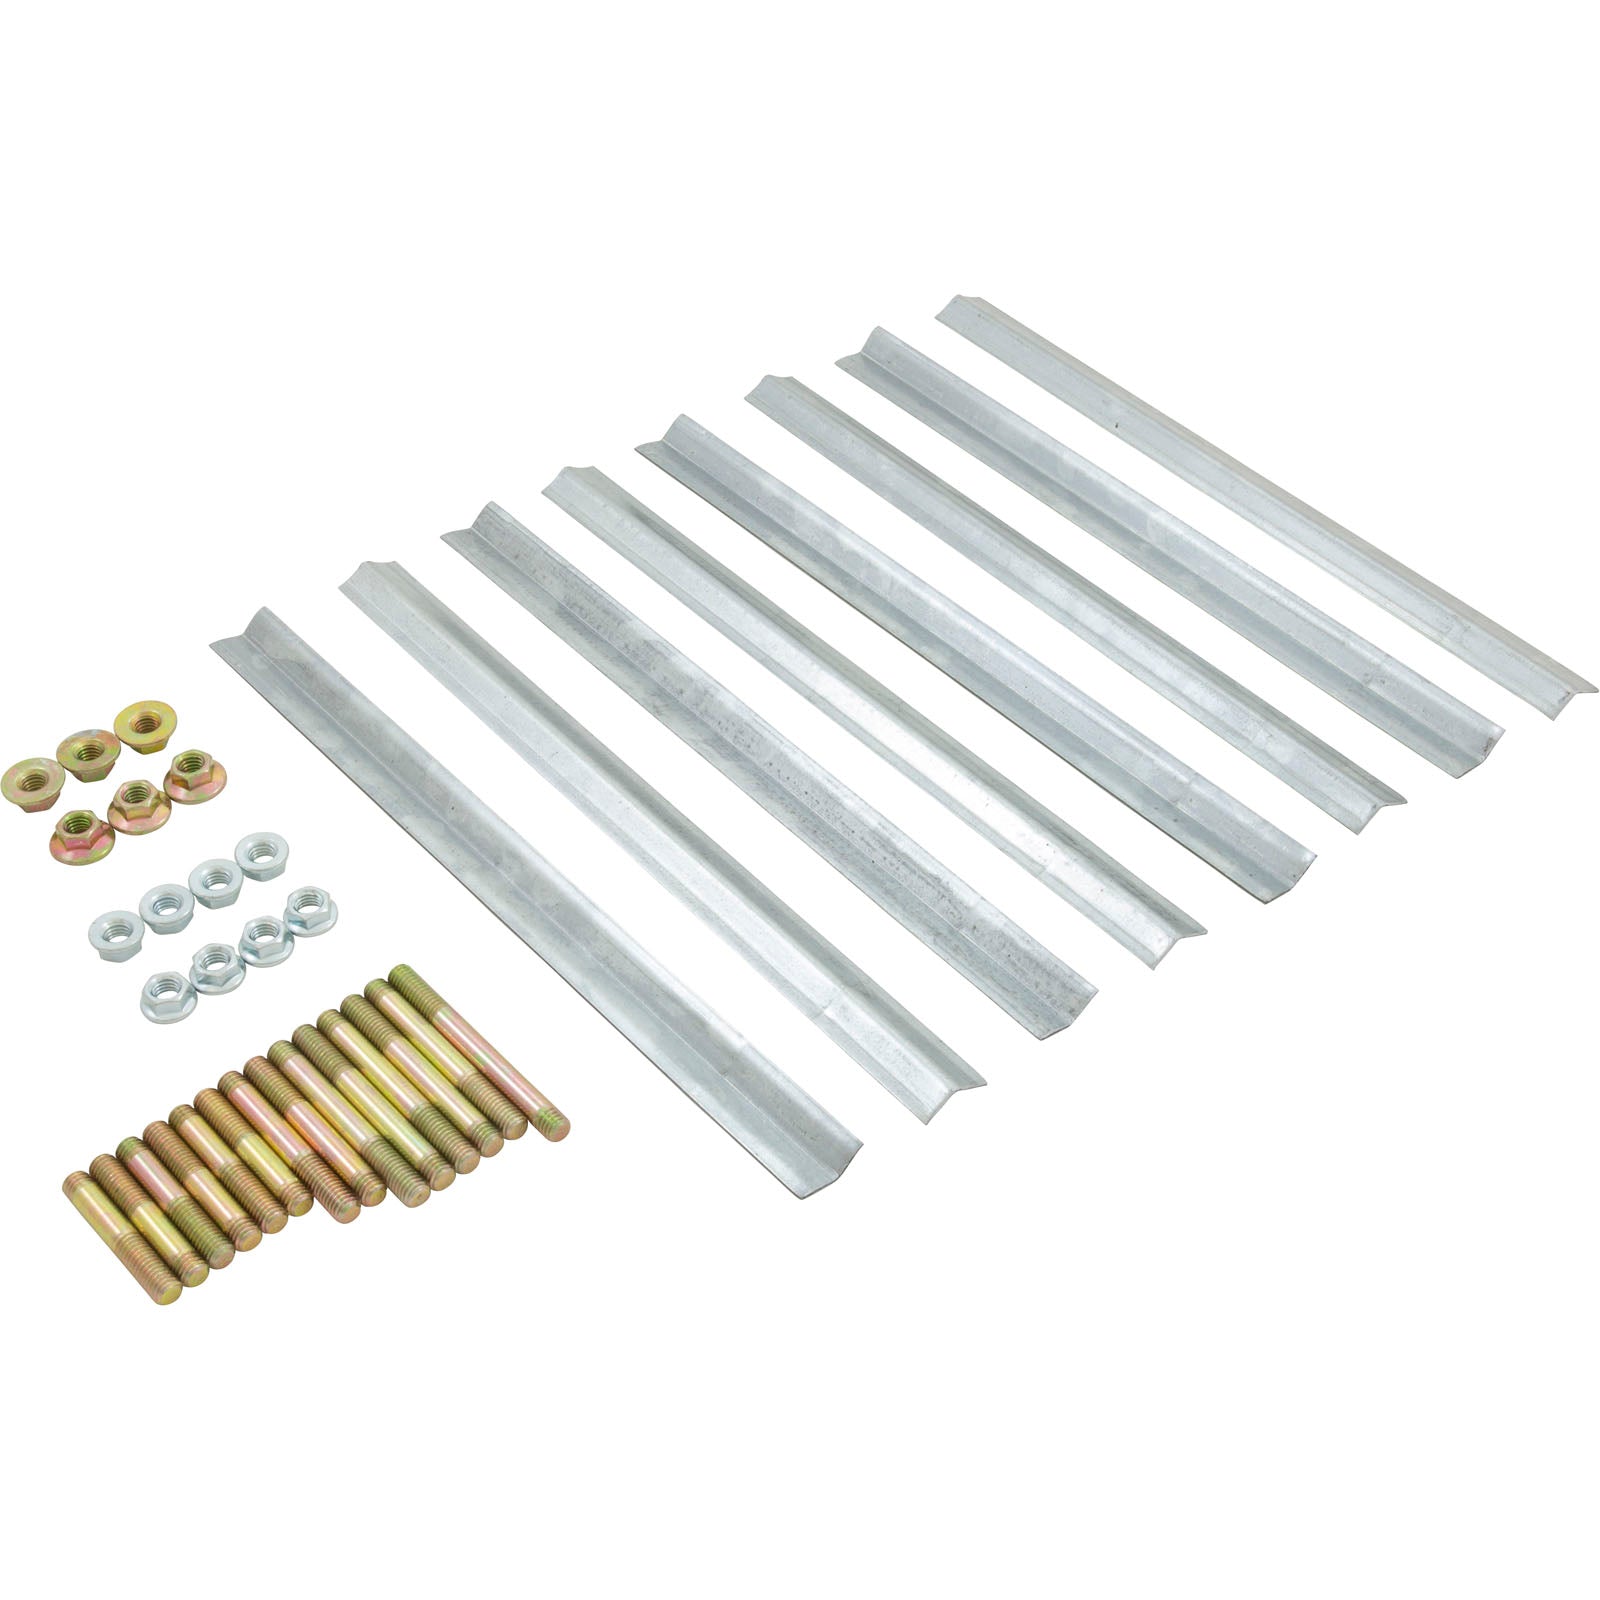 Raypak 010055F ASME Copper Tube Bundle For Model 206A and 207A Pool Heater